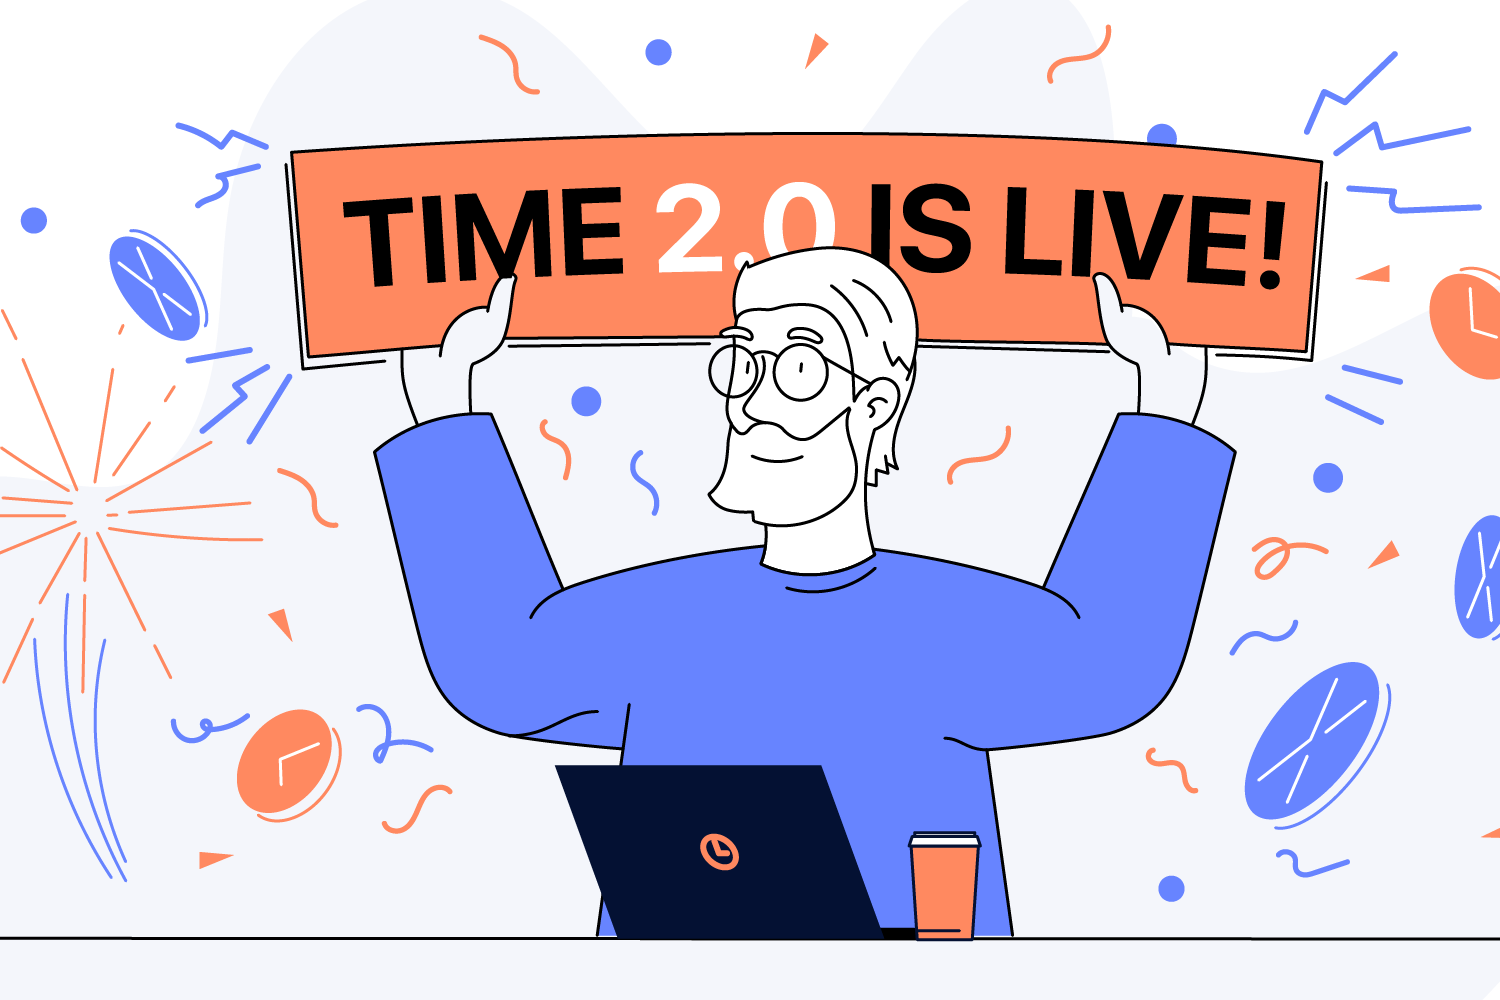 TIME 2.0 is Live!